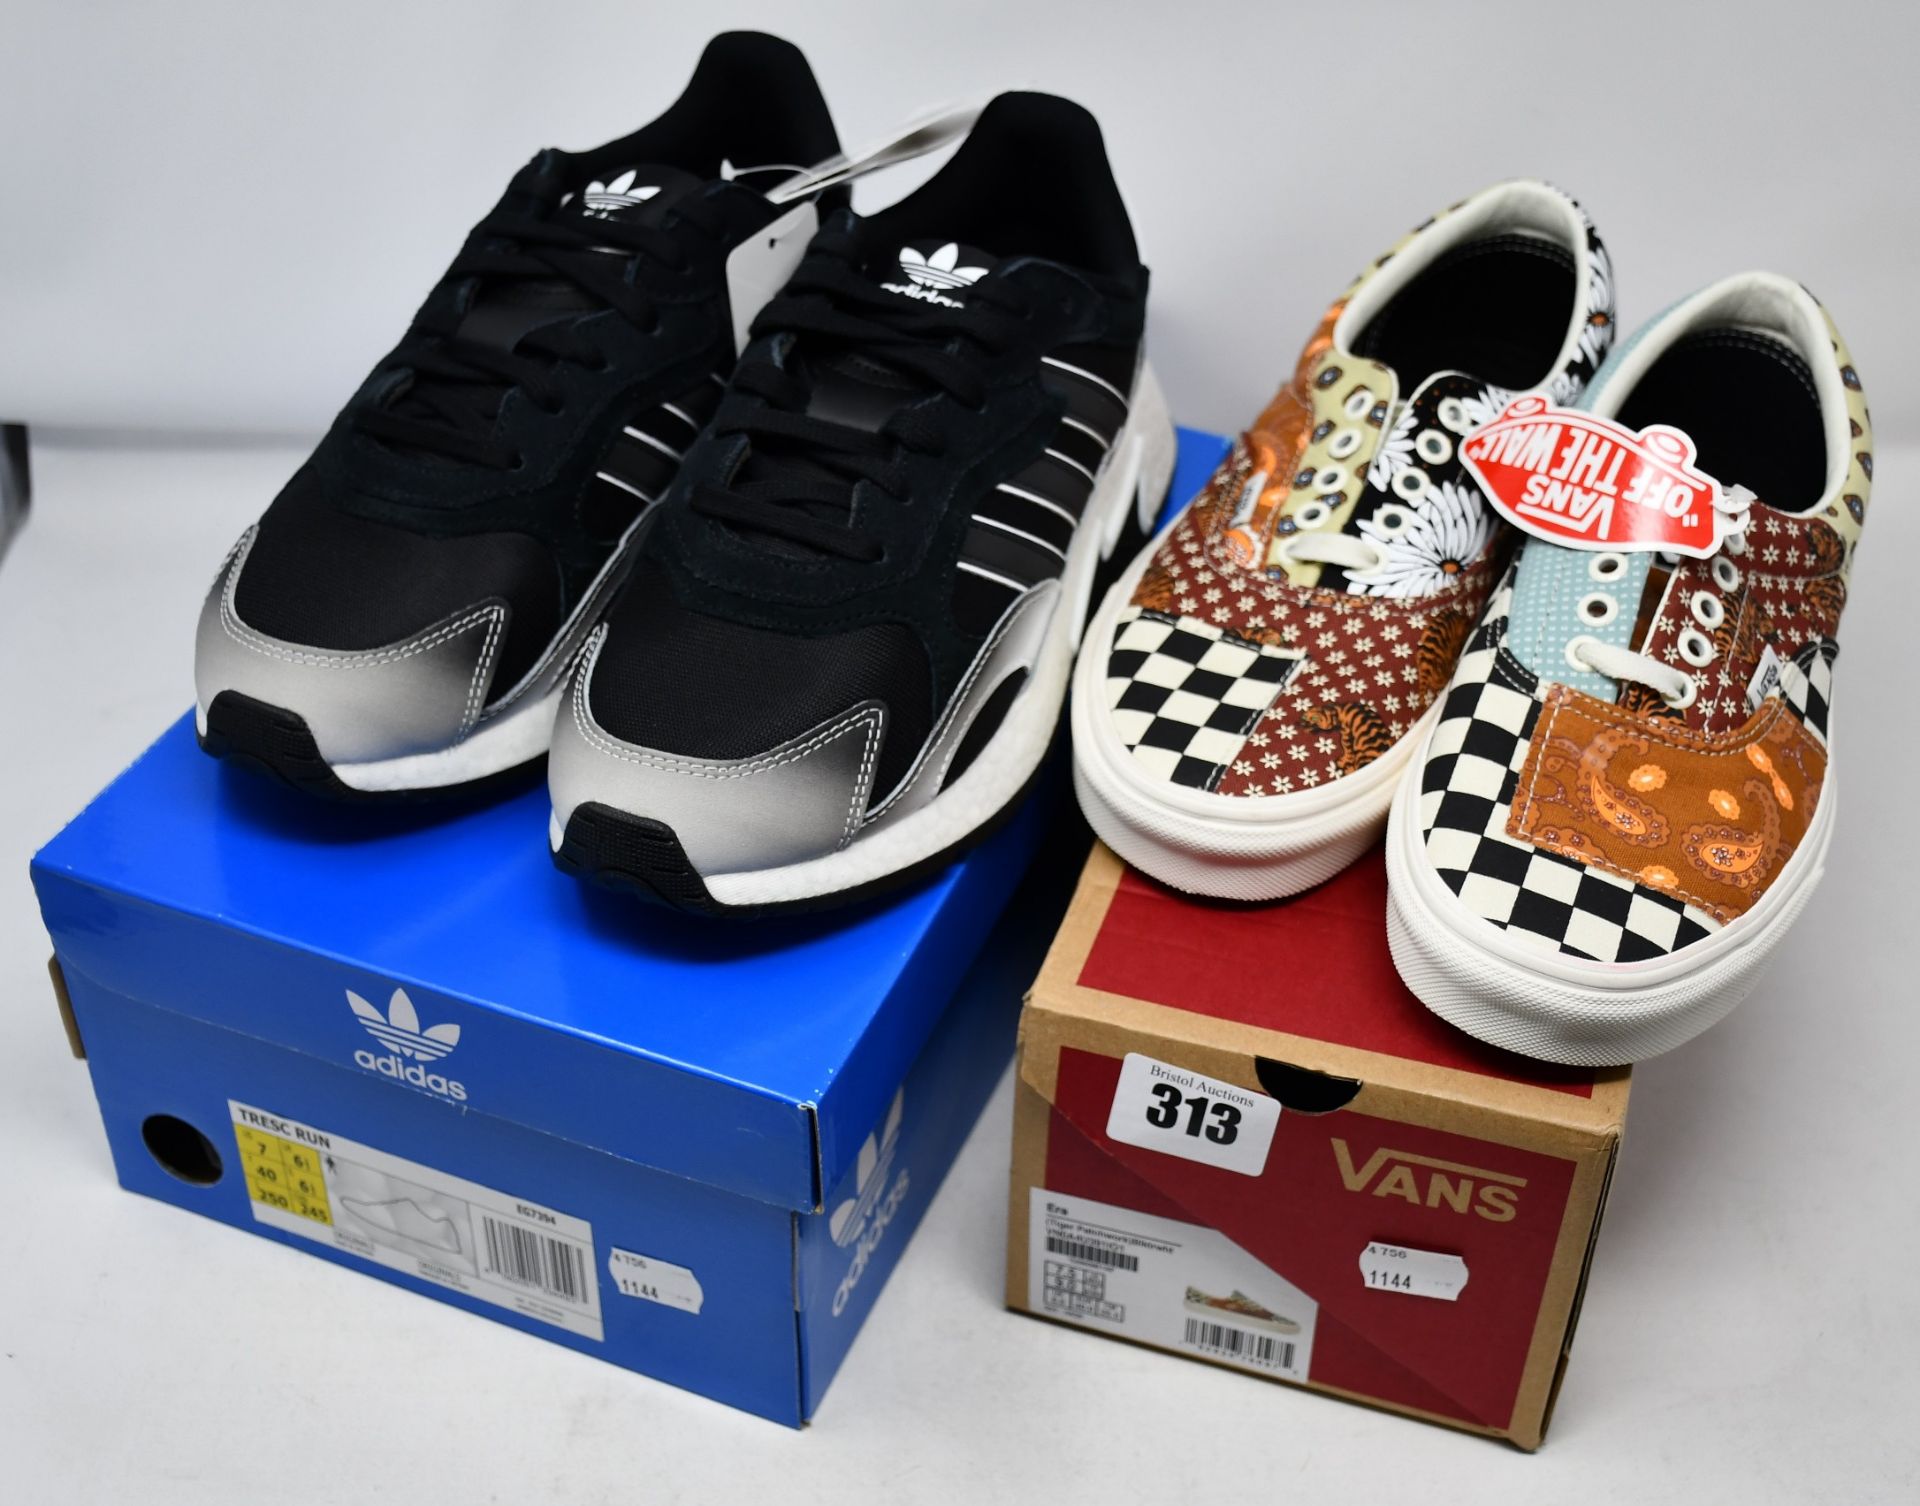 One as new Adidas Tresc Run Shoes size UK 6.5 (EG7394). One as new Vans Tiger Patchwork shoes size